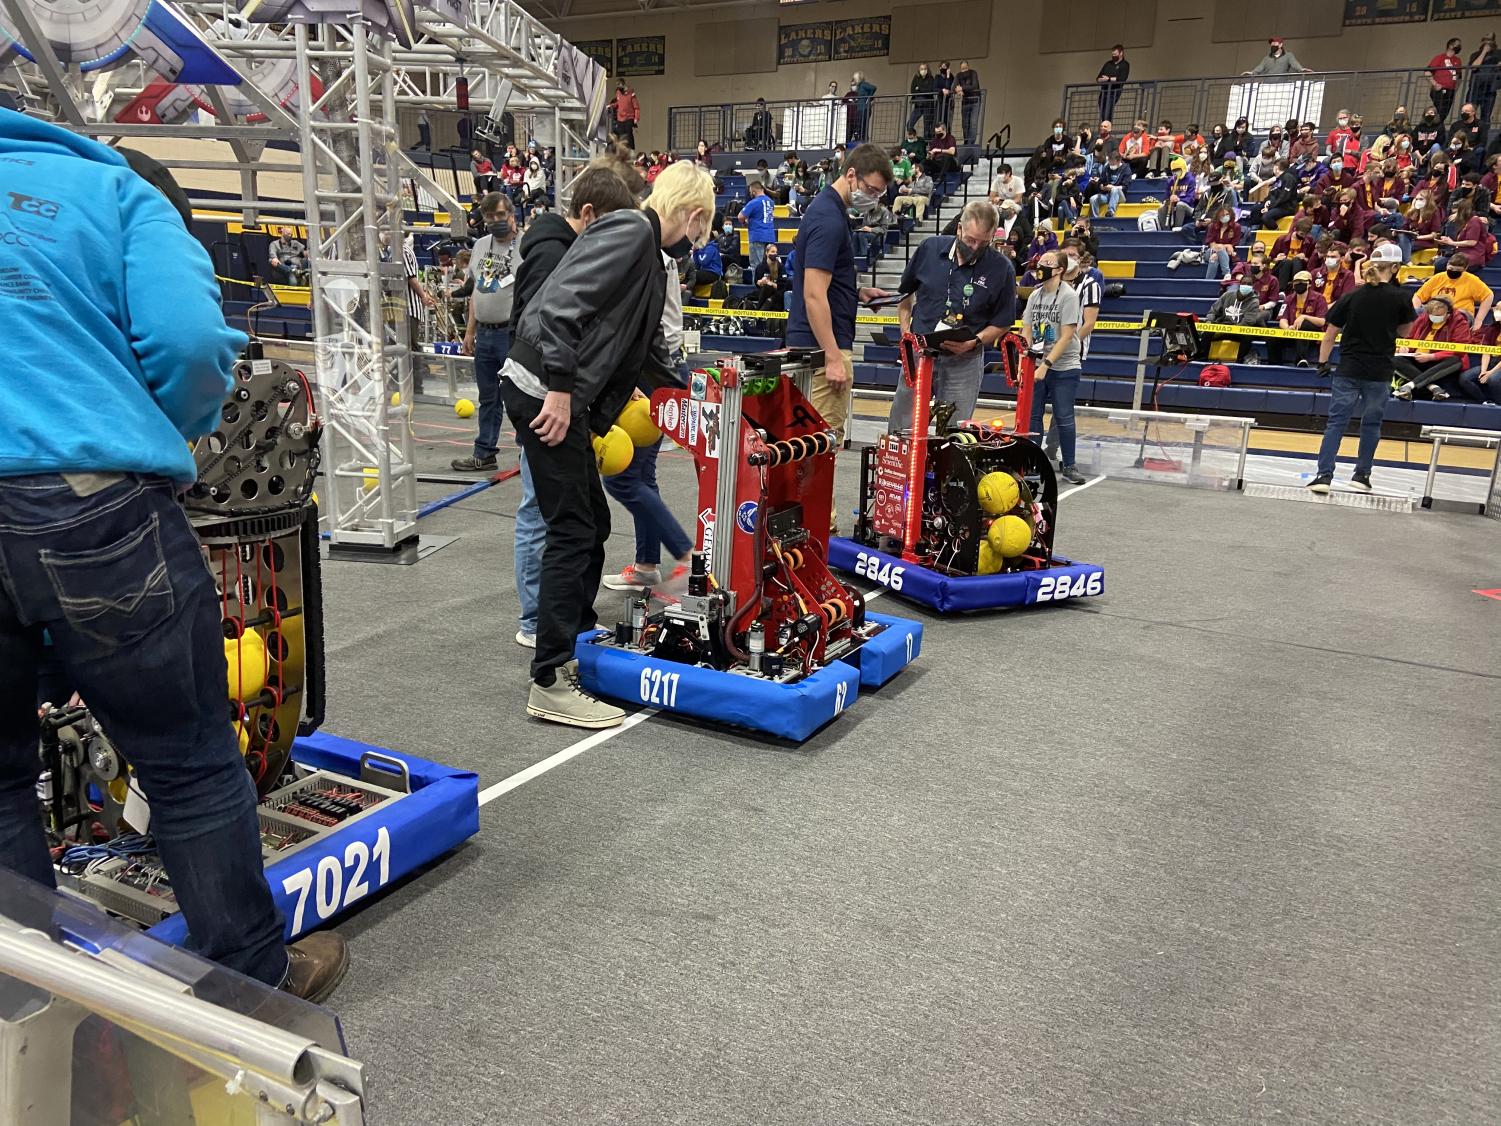 The Robotics team had their first mini meet after a season of cancellations last year.